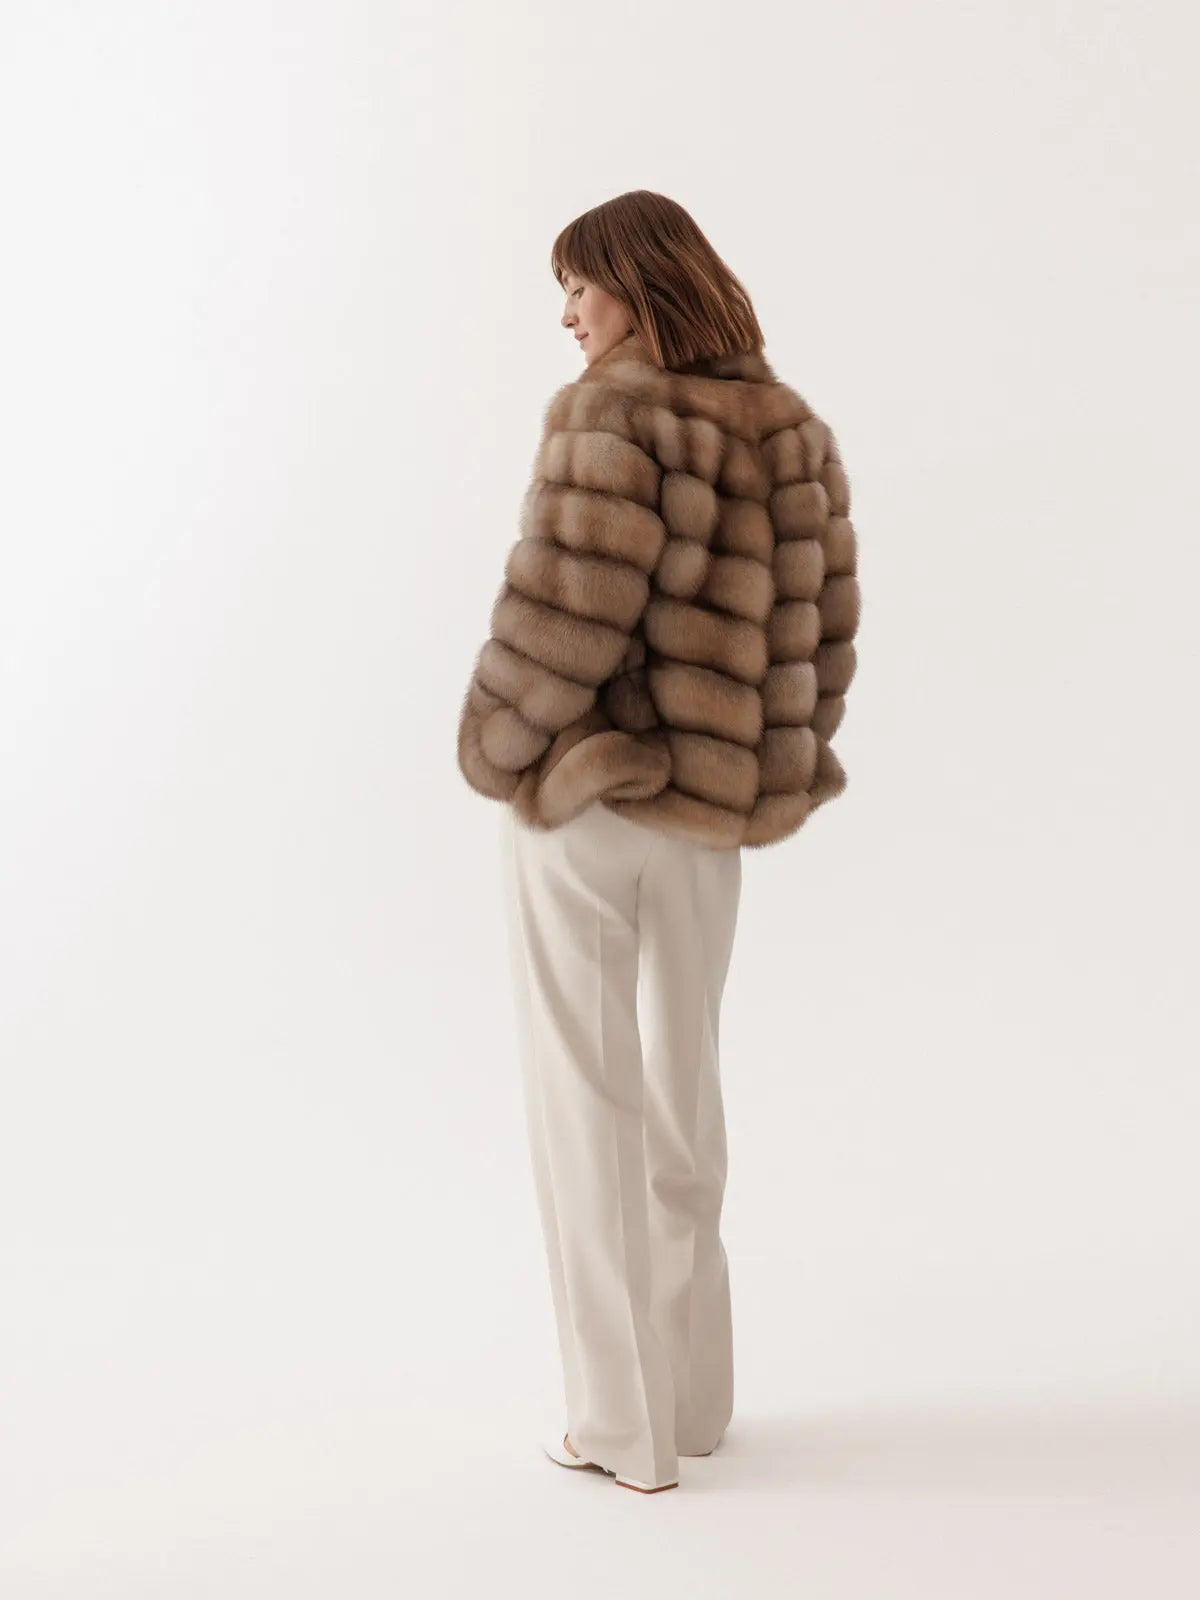 Marten coat with stand up collar